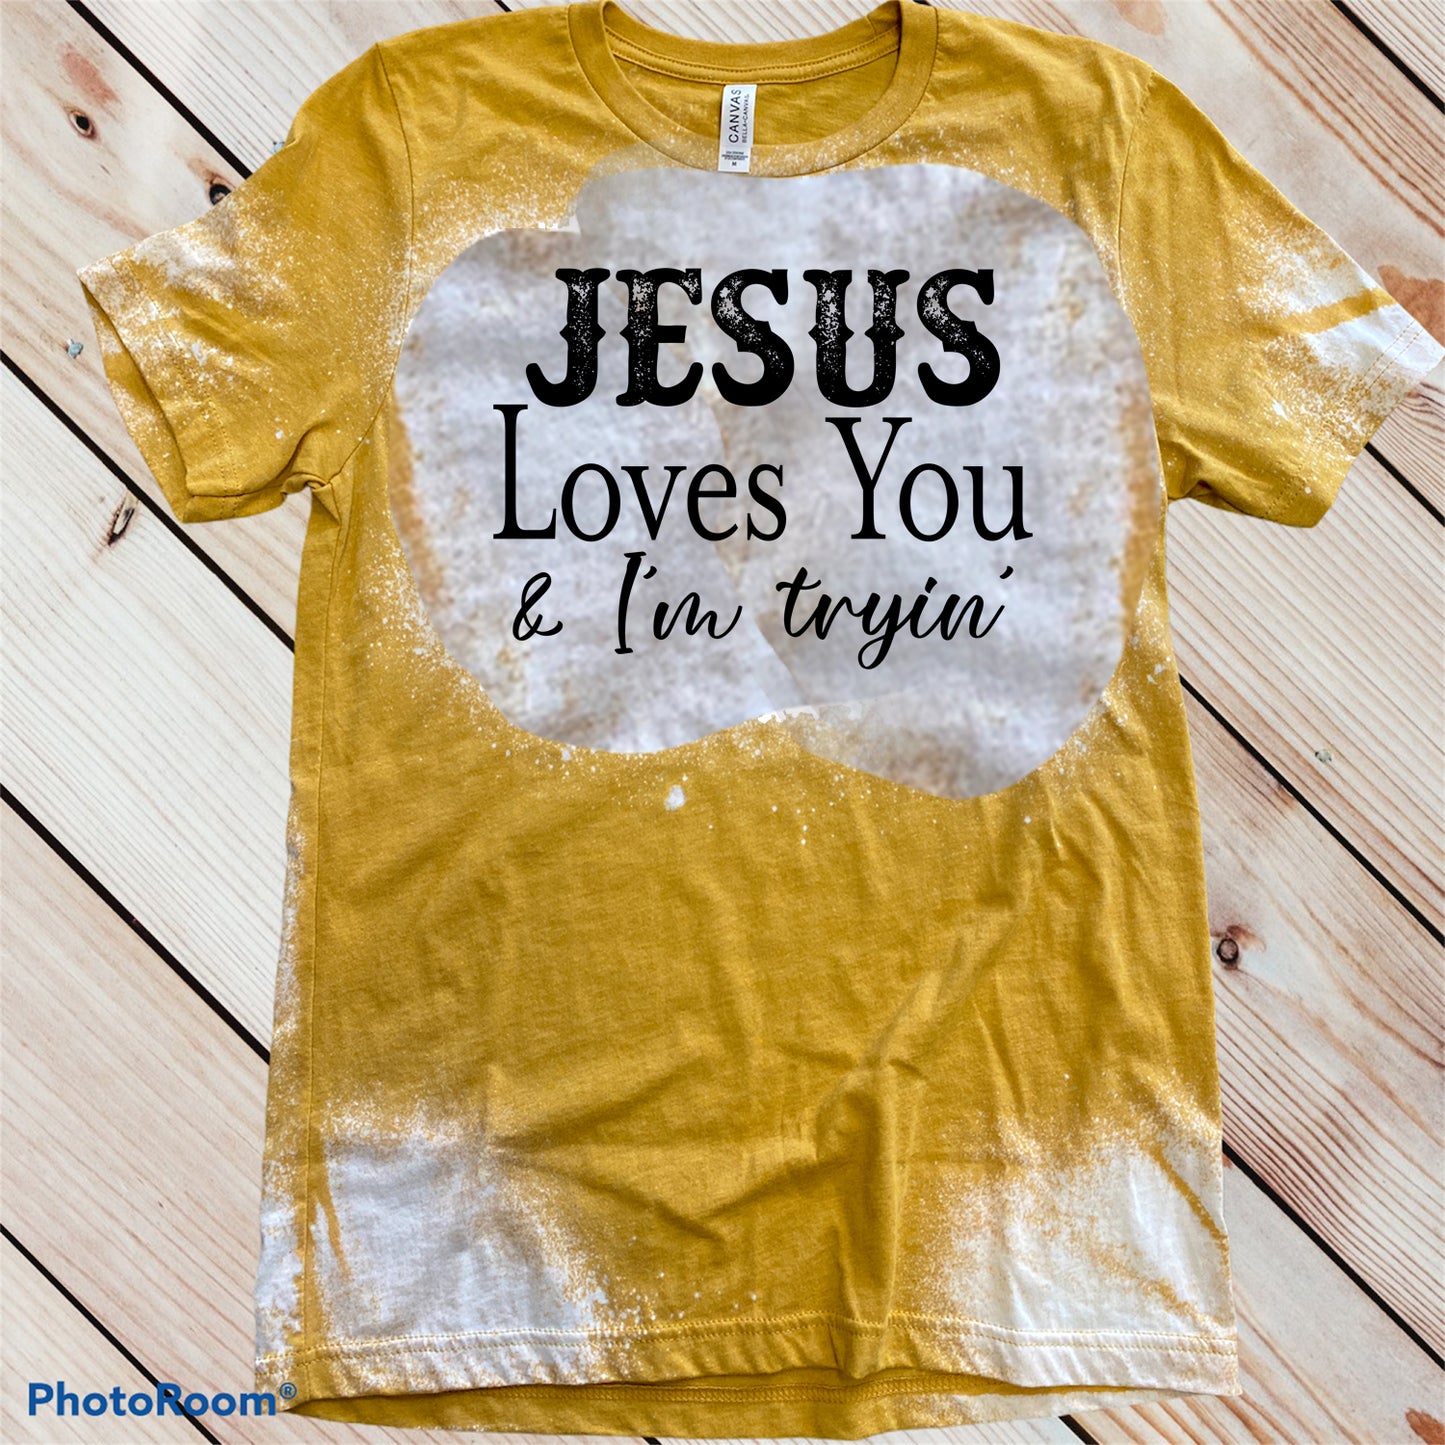 Jesus Loves You & I'm trying Bleached T-Shirt